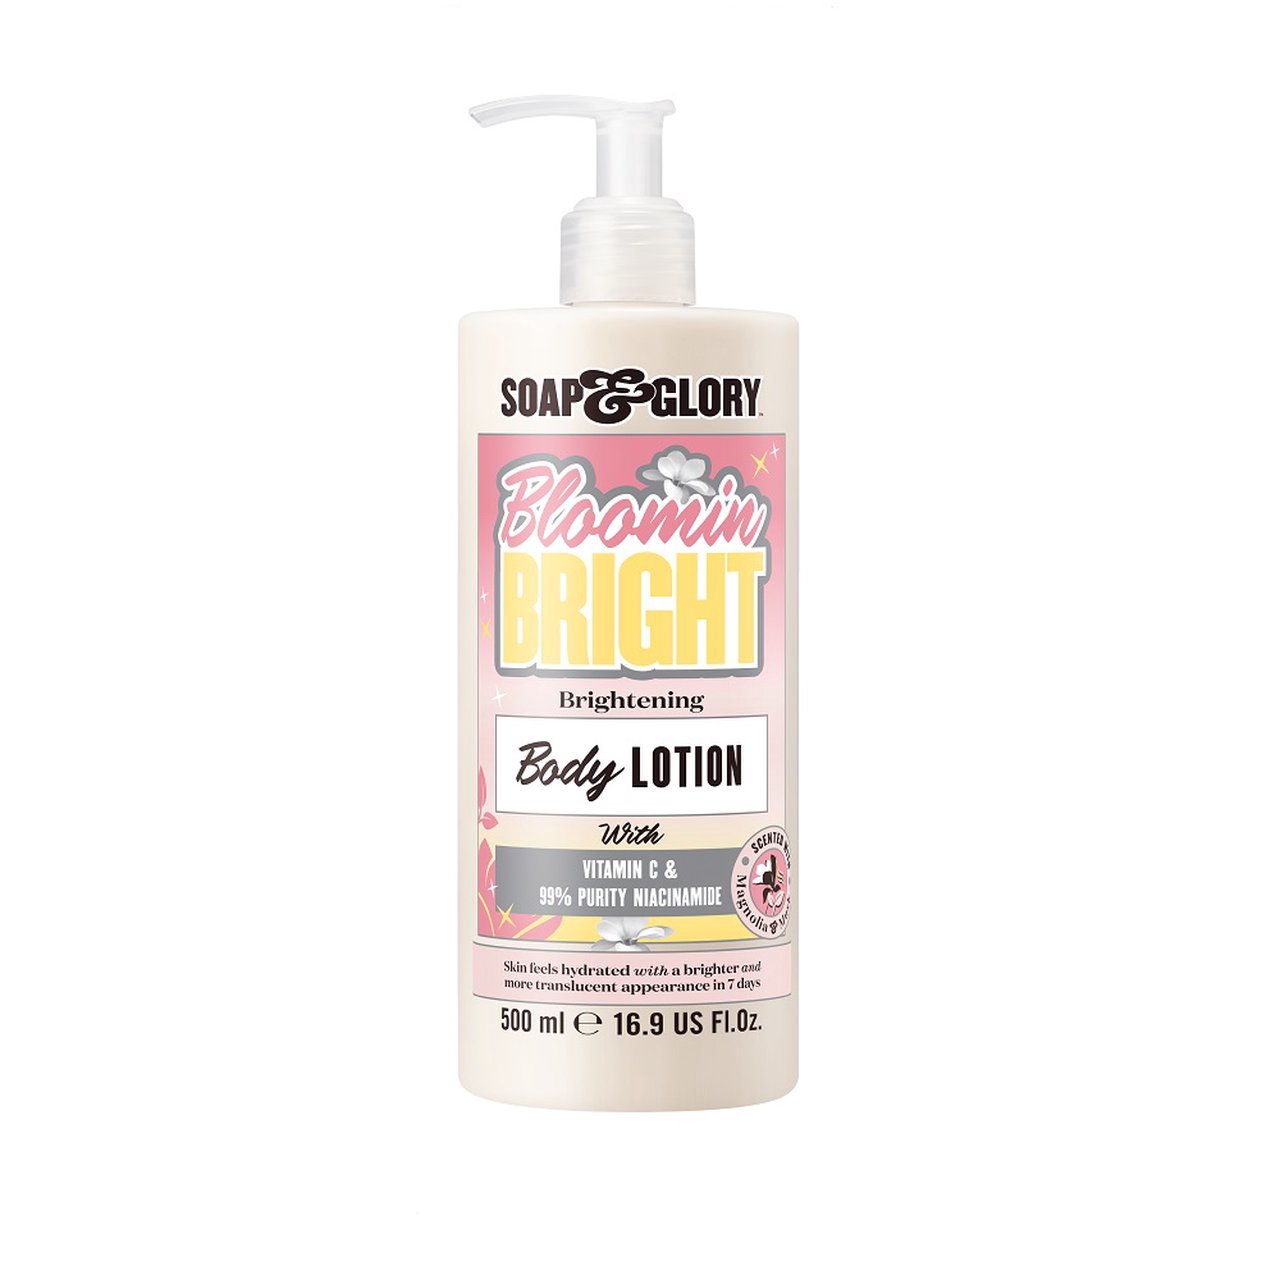 Soap&Glory Bloomin Bright Brightening Body Lotion